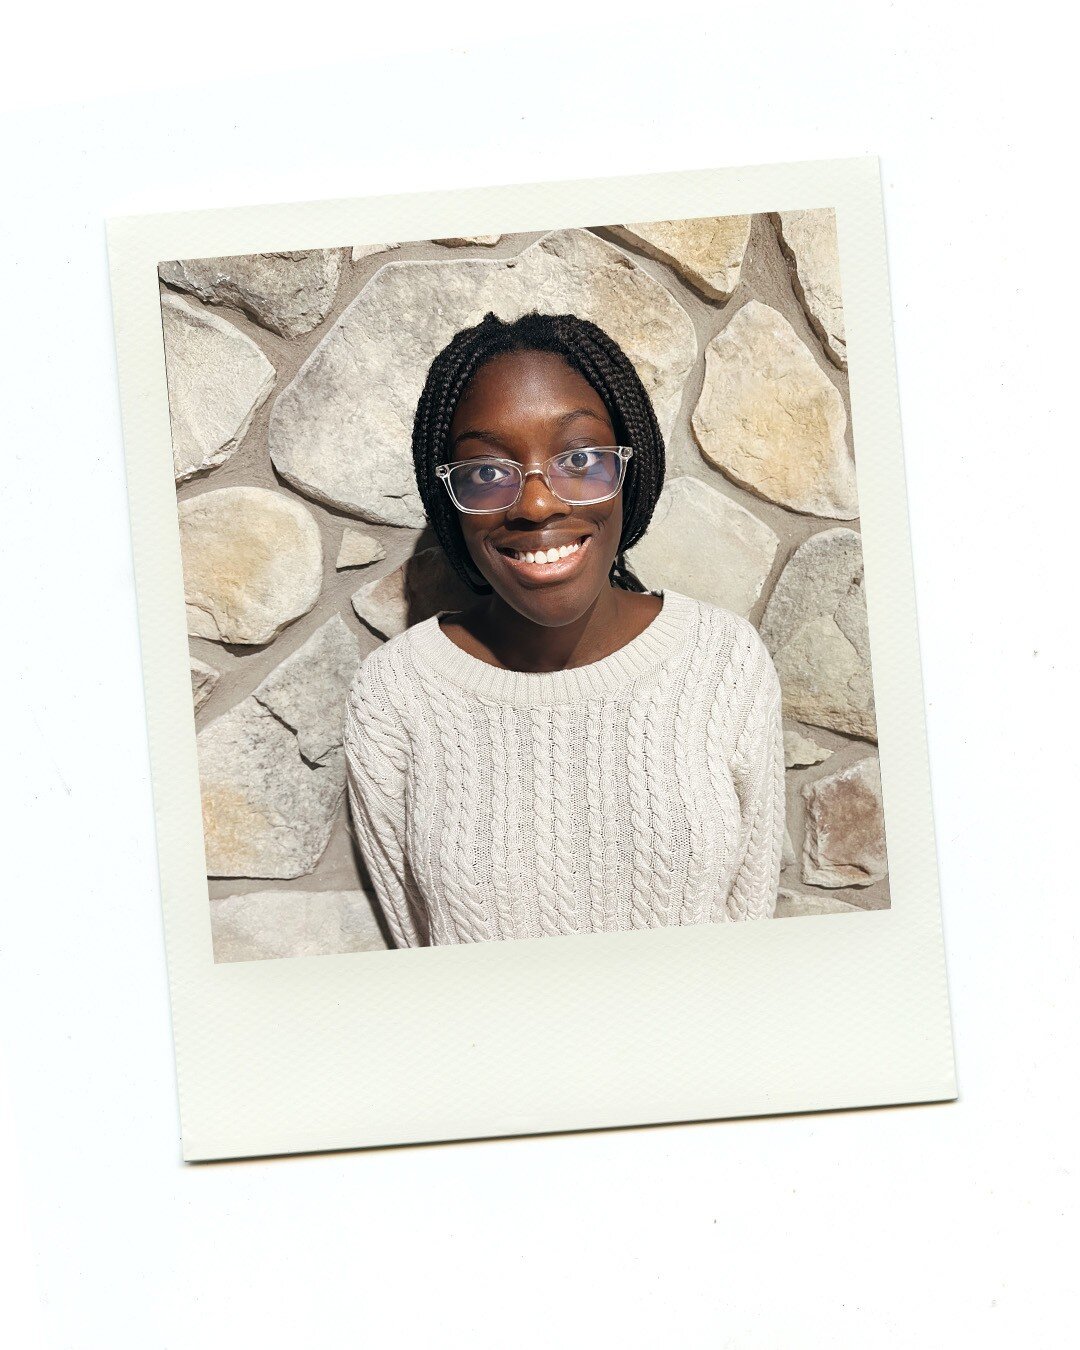 Meet: Dami Bankole 🌟

Dami is a 16-year-old junior at North Cross School. She participates in clubs like robotics and Help Save the Next Girl, the theatre program, and is on her school's tennis team. She is Nigerian-American and moved from New York 